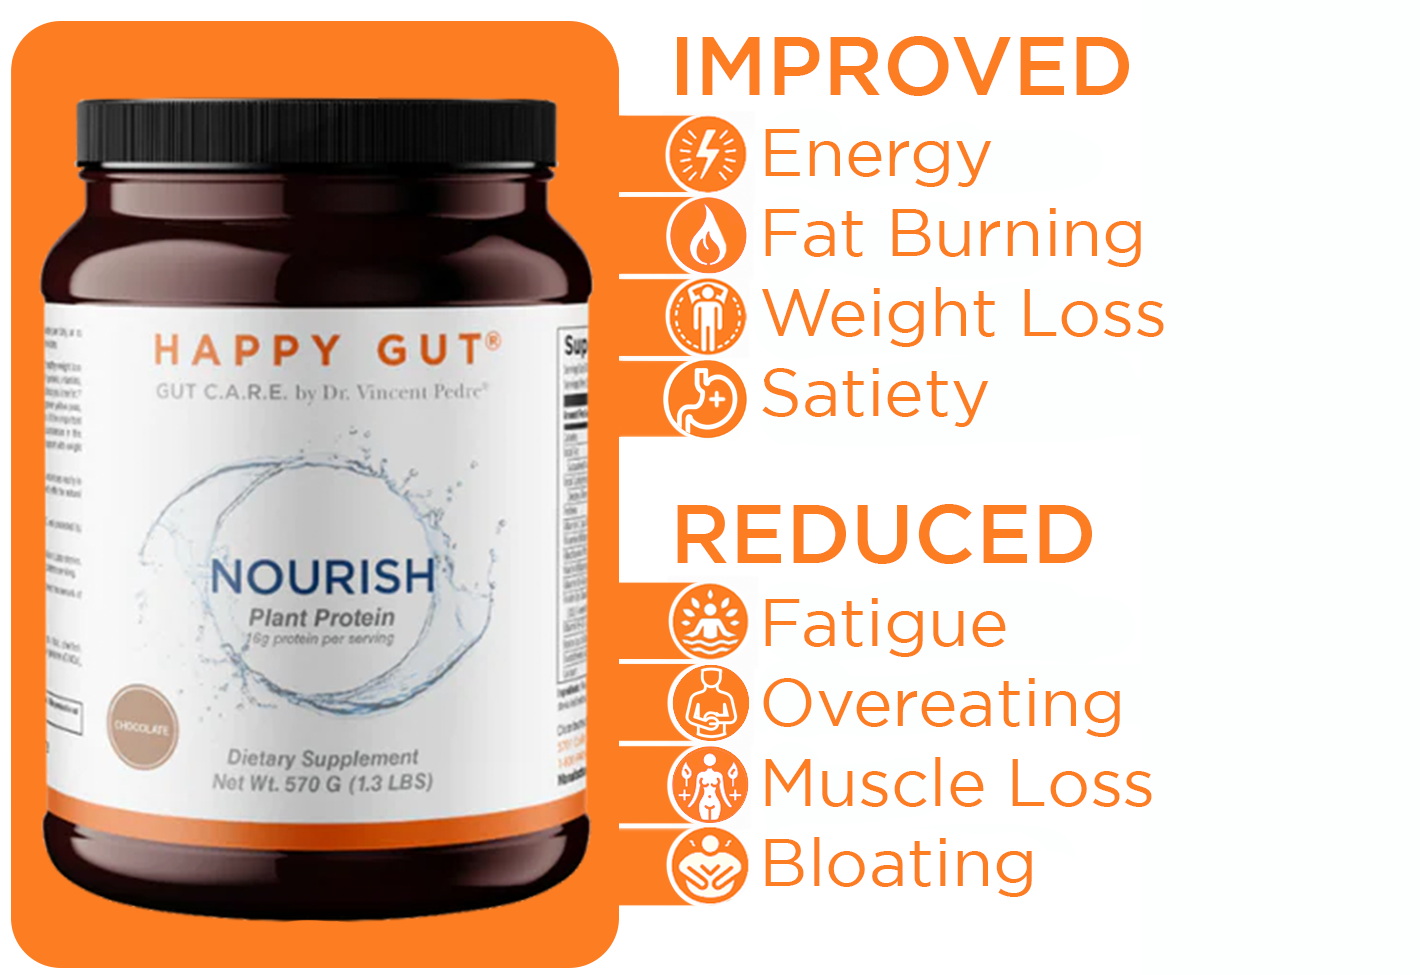 NOURISH | Plant Protein Chocolate 15% OFF + FREE COPY Happy Gut book